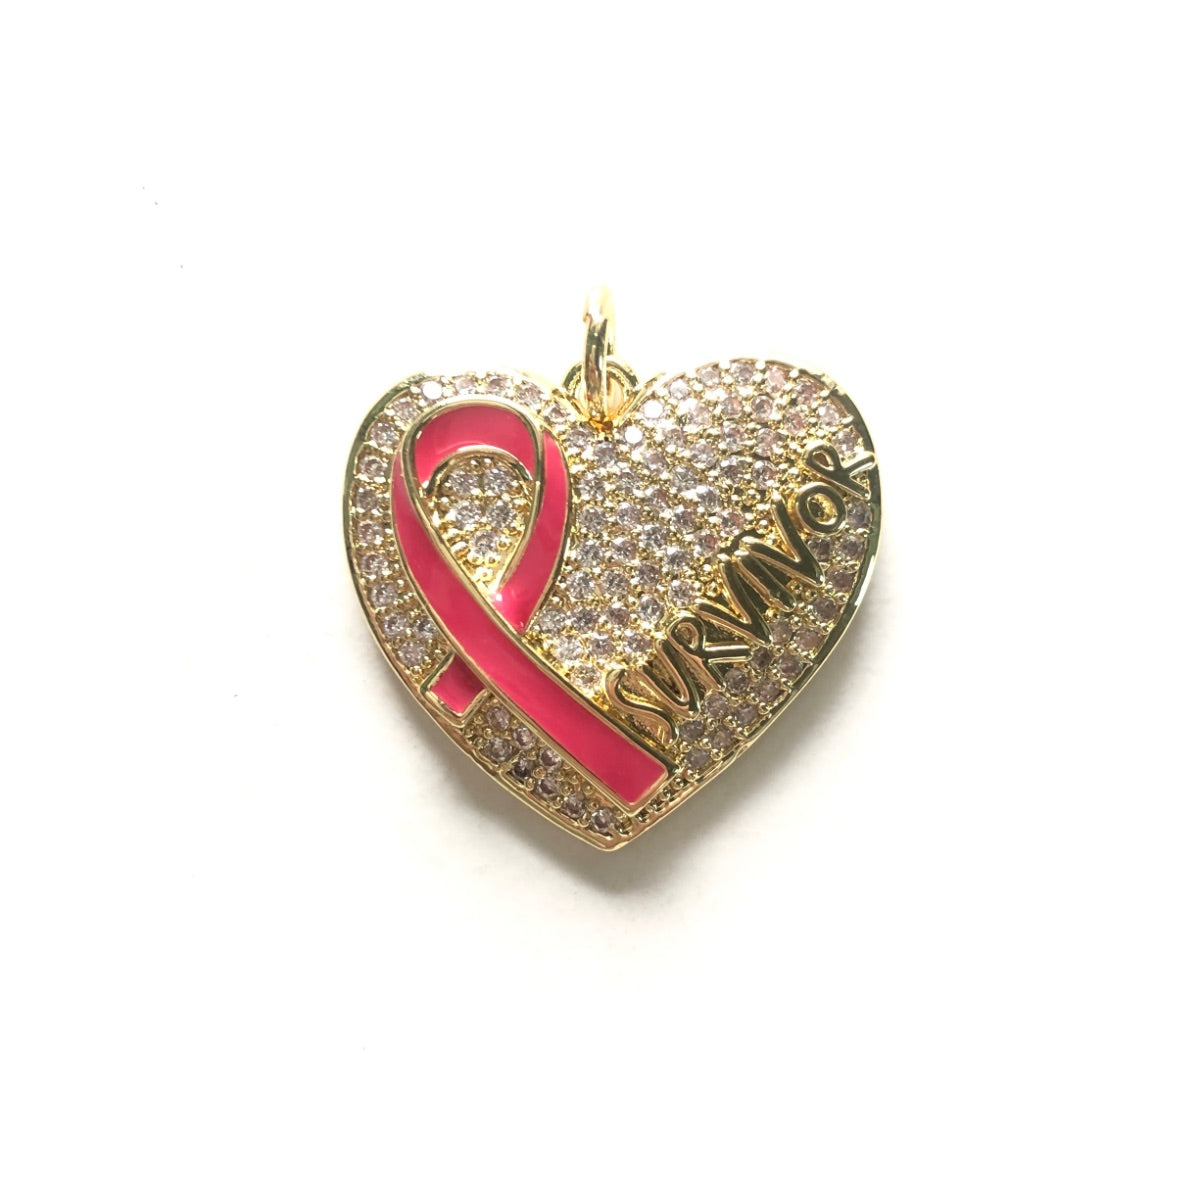 10pcs/lot CZ Pave Pink Ribbon Heart Survivor Word Charms - Breast Cancer Awareness CZ Paved Charms Breast Cancer Awareness Hearts New Charms Arrivals Charms Beads Beyond